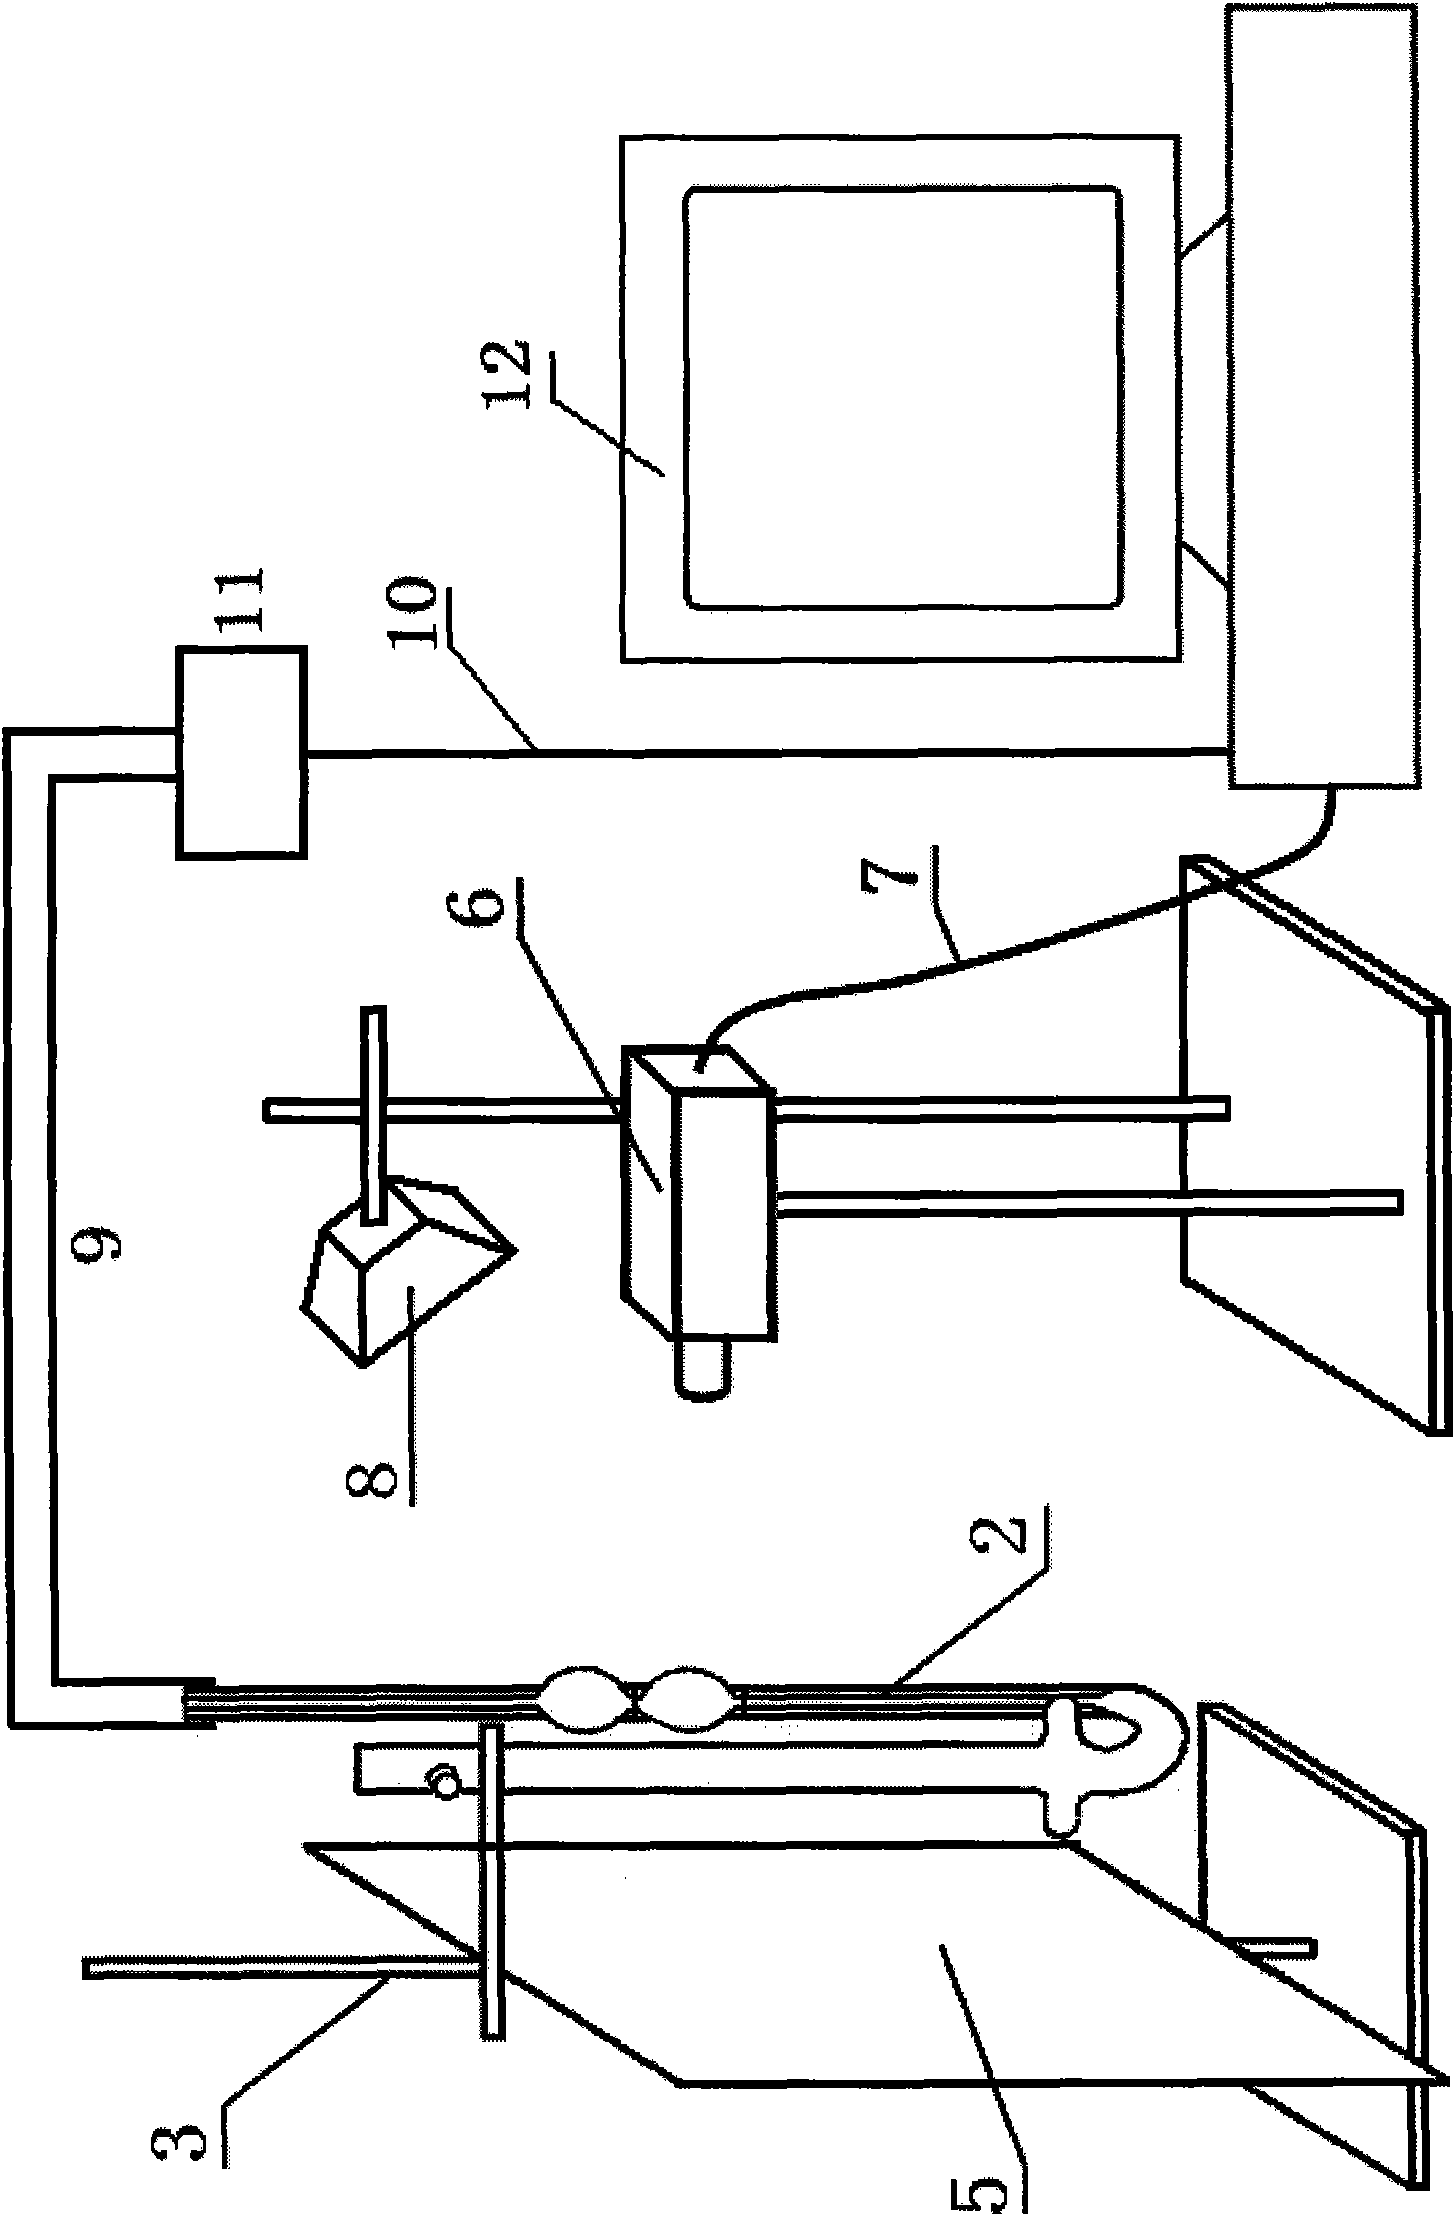 Computer vision-based system and computer-vision based method for automatically measuring viscosity of colored liquid